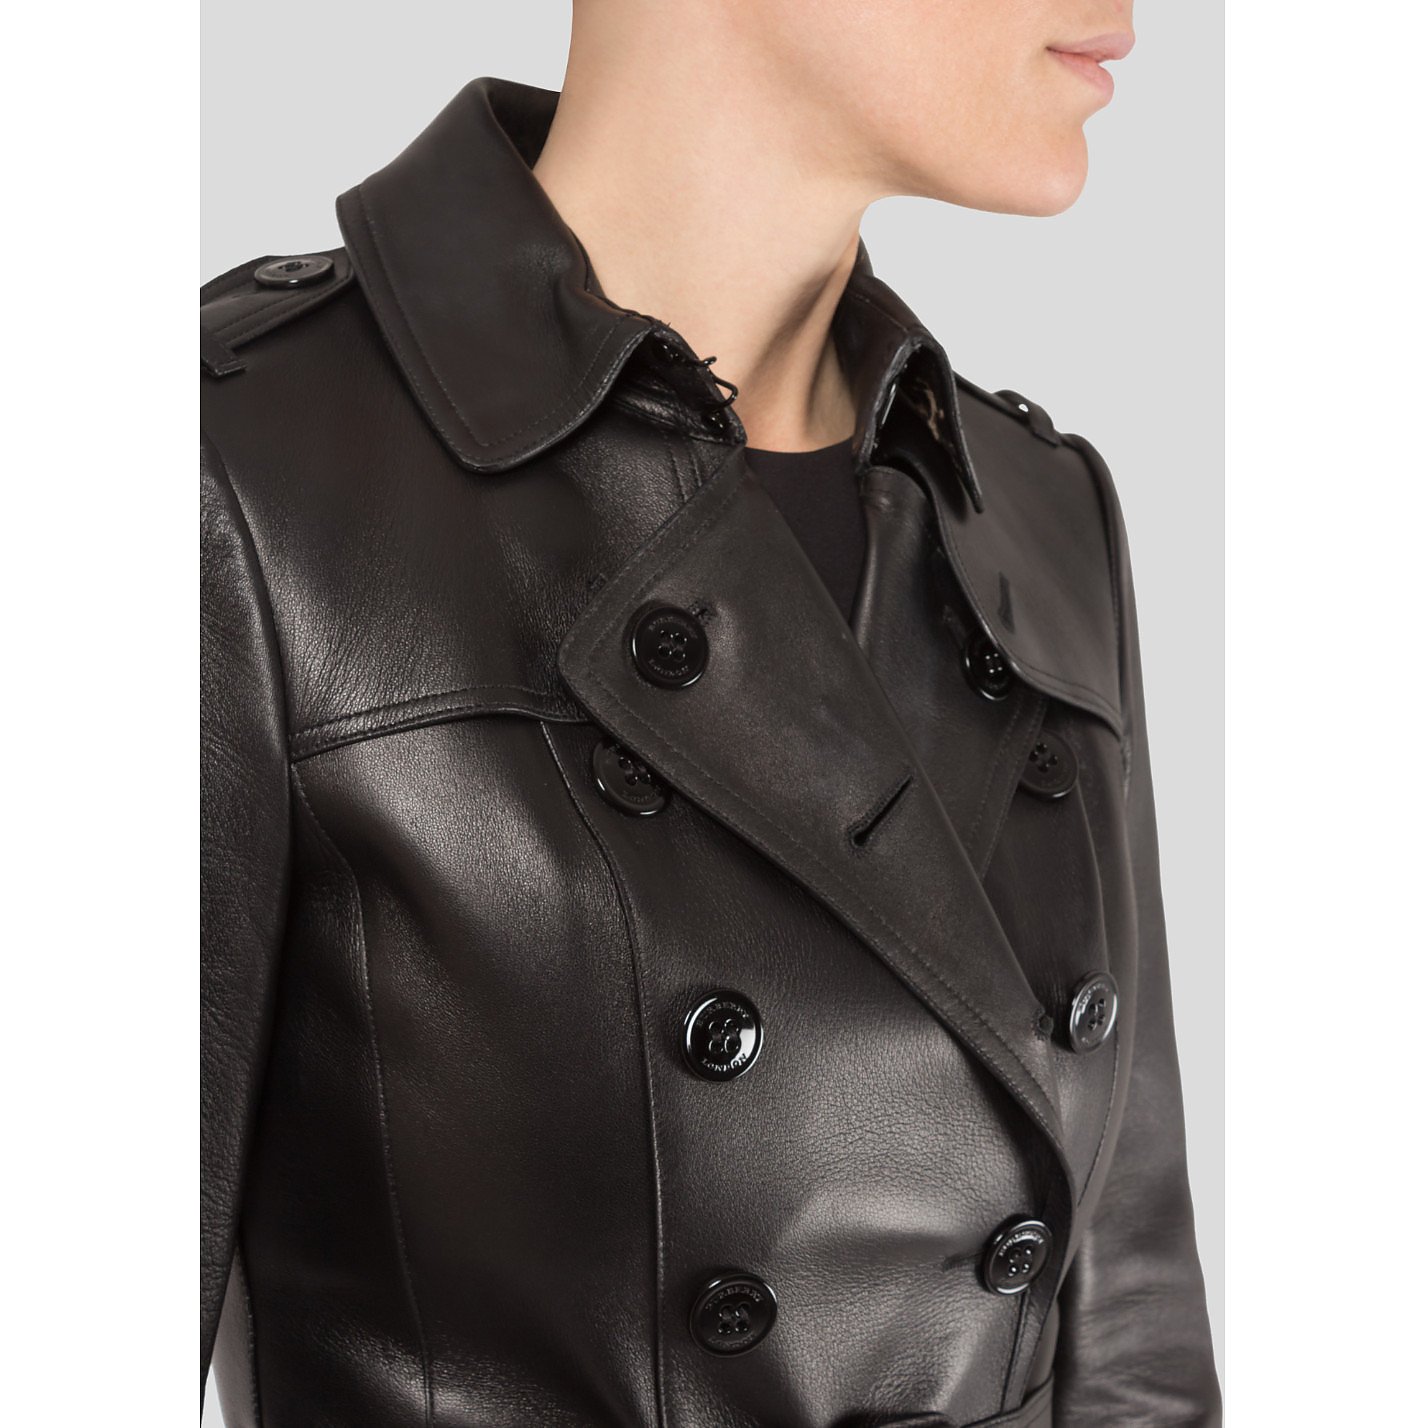 Rent Buy Burberry Leather Trench Coat With Pony Hair Detail | MY WARDROBE HQ